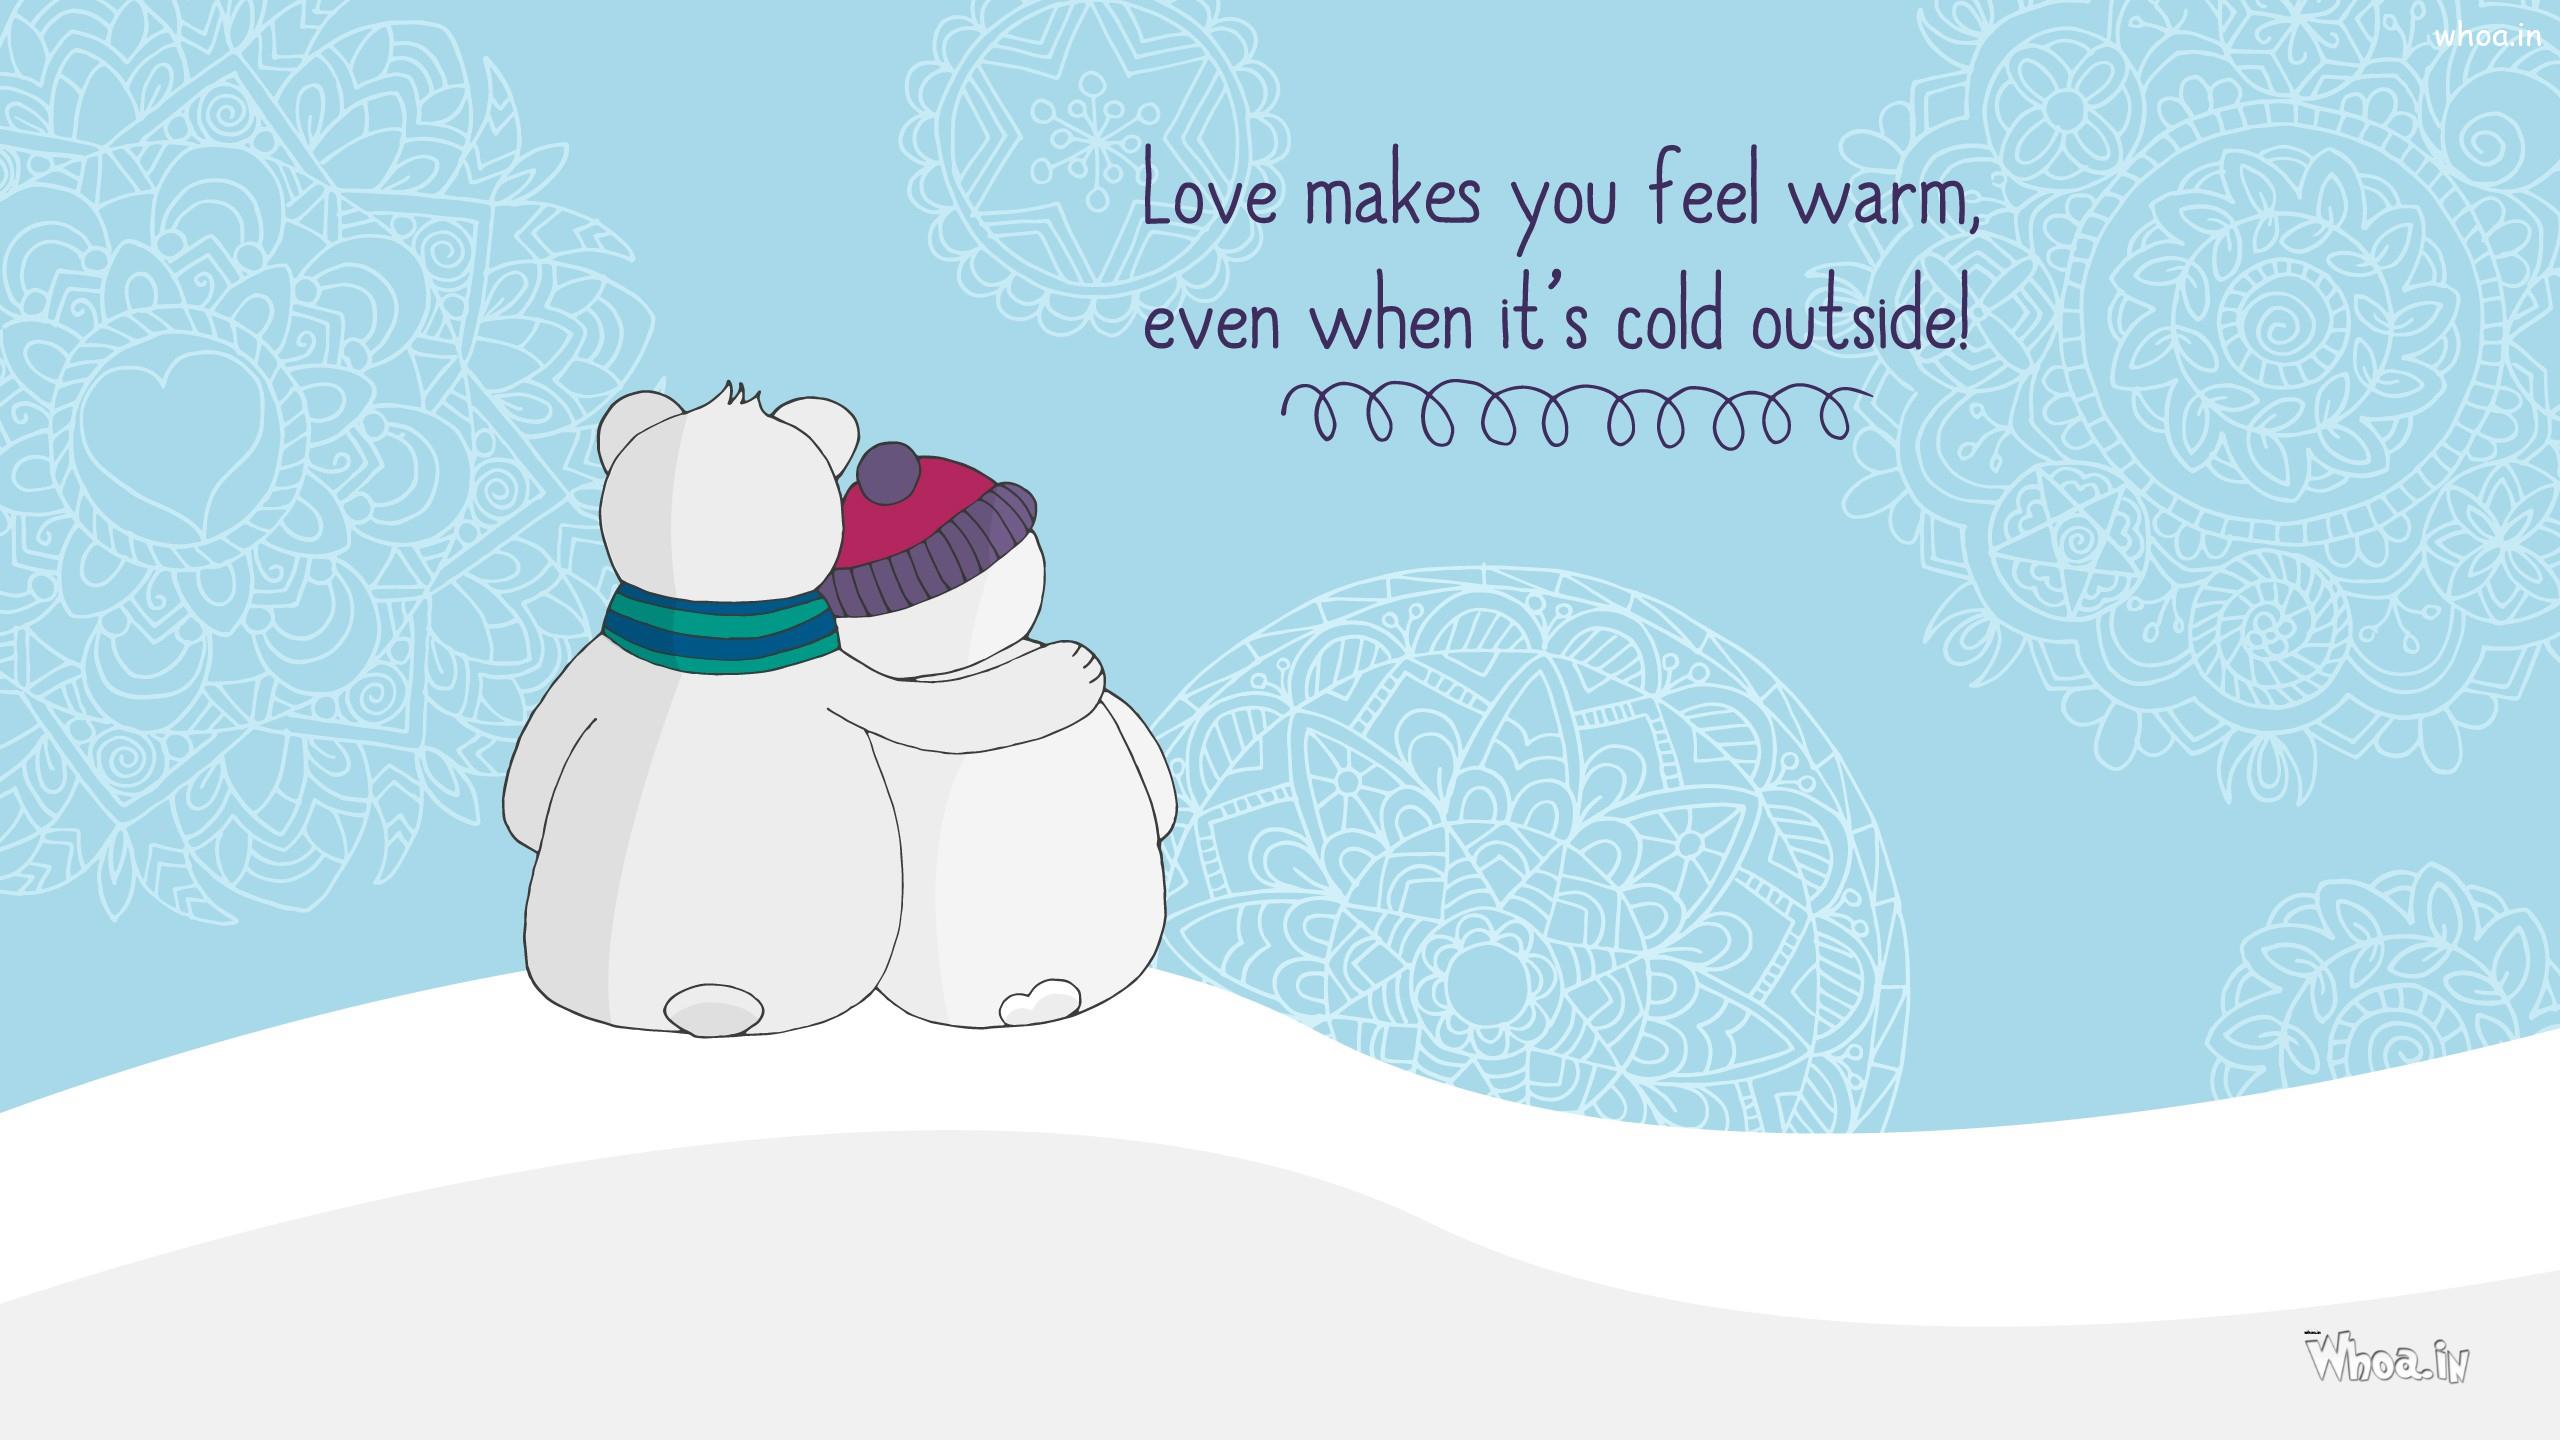 Love With Cute Couple In Cartoon HD Wallpapers With Slogan